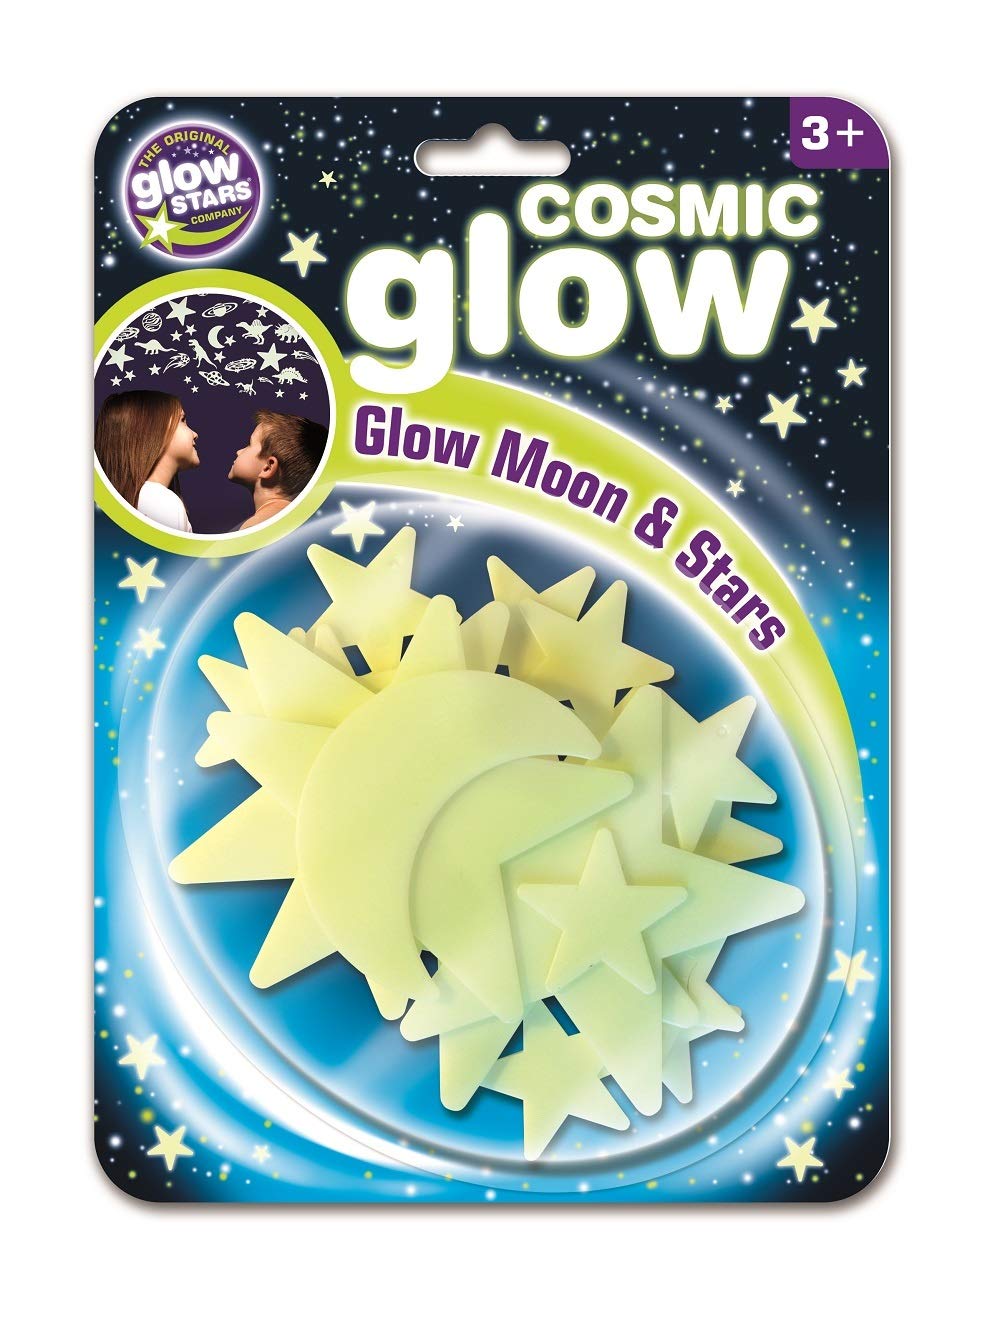 The Original Glowstars: Cosmic Glow Moon & Stars - Glow-in-The Dark, Space Décor, Plastic, Self-Adhesive Pads, Decorate Ceilings, Walls & More